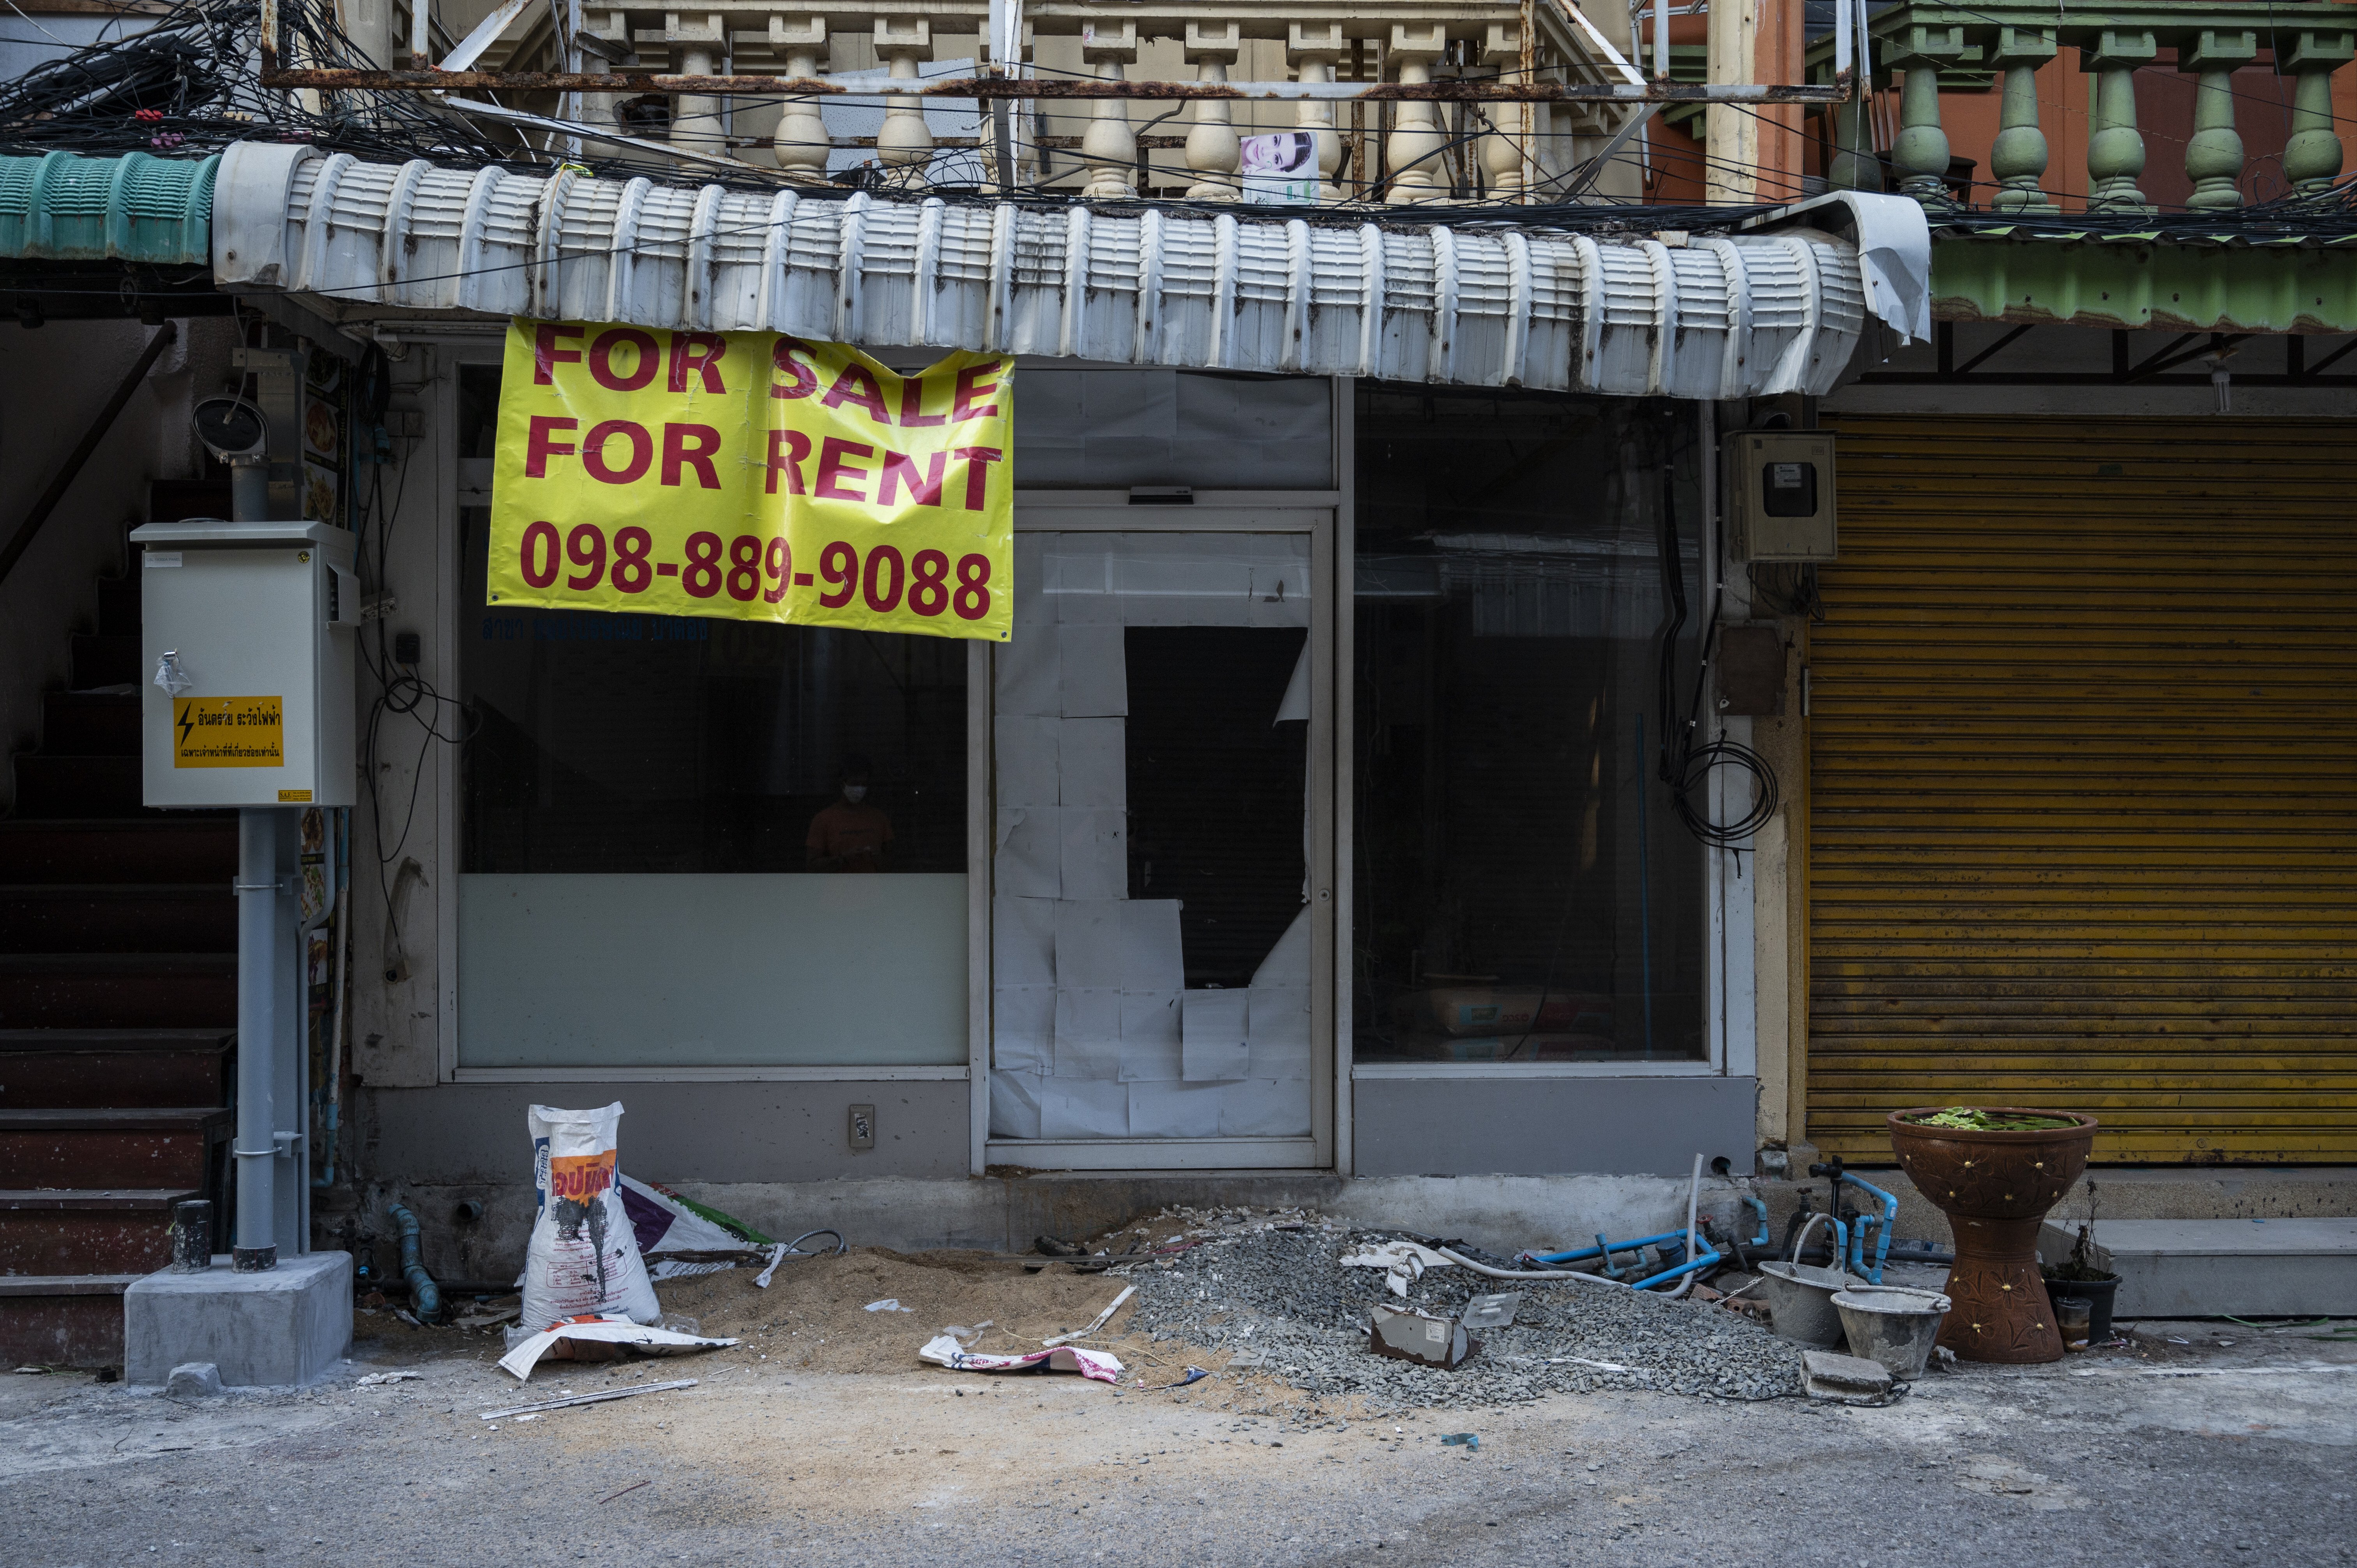 A shuttered shop available for rent in Phuket, Thailand, in January. Photo: Getty Images